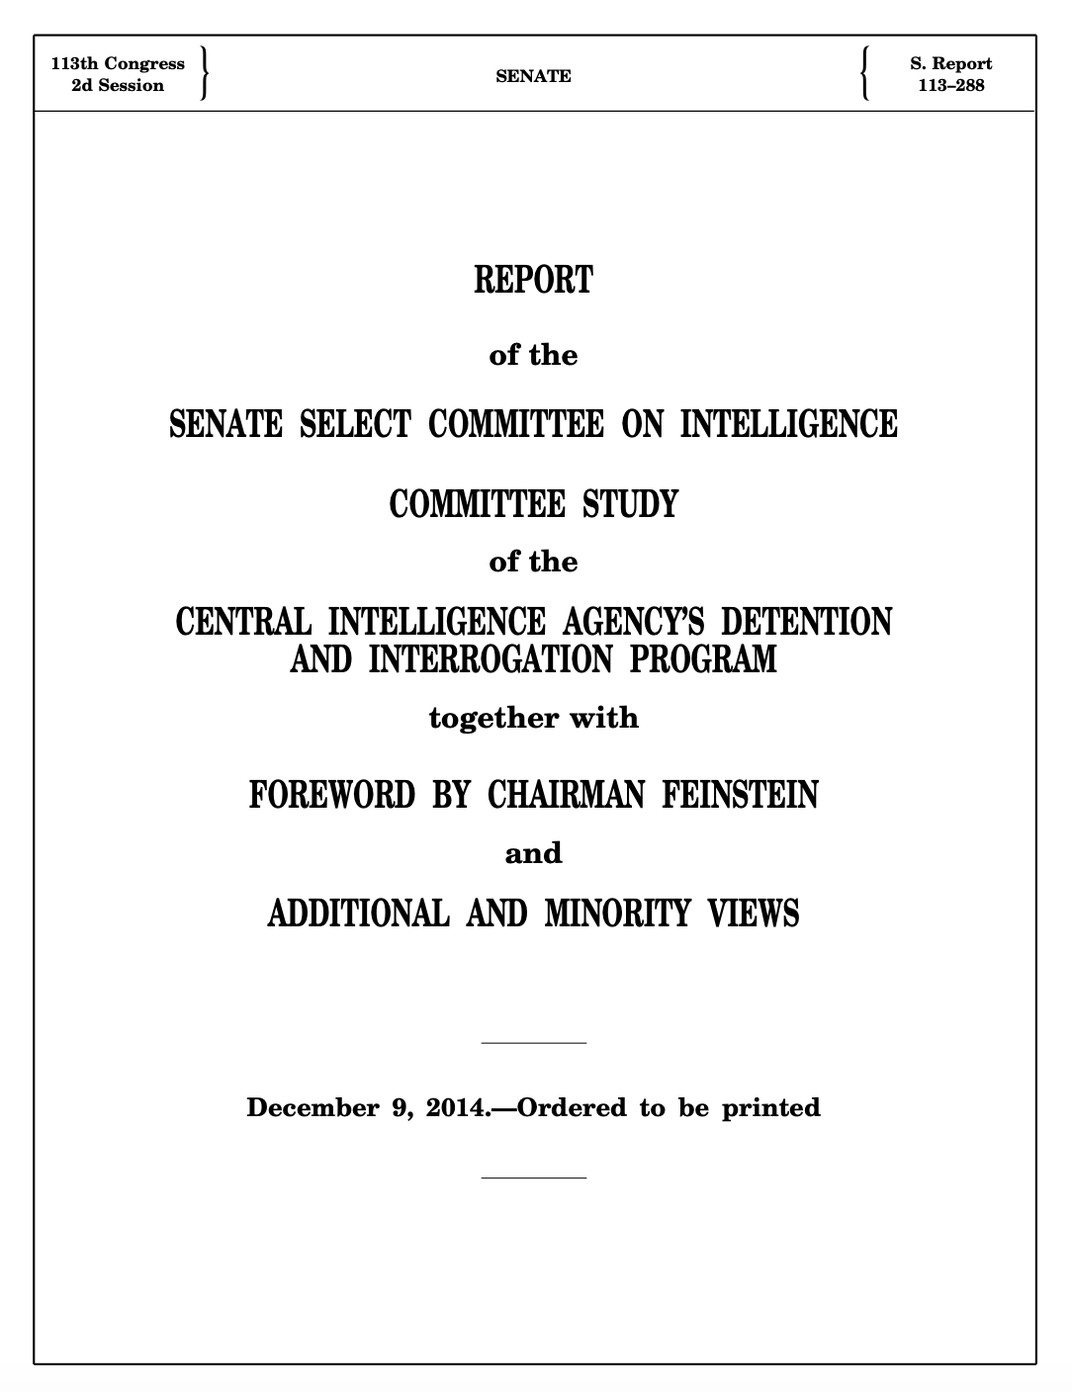 Opening page of the report